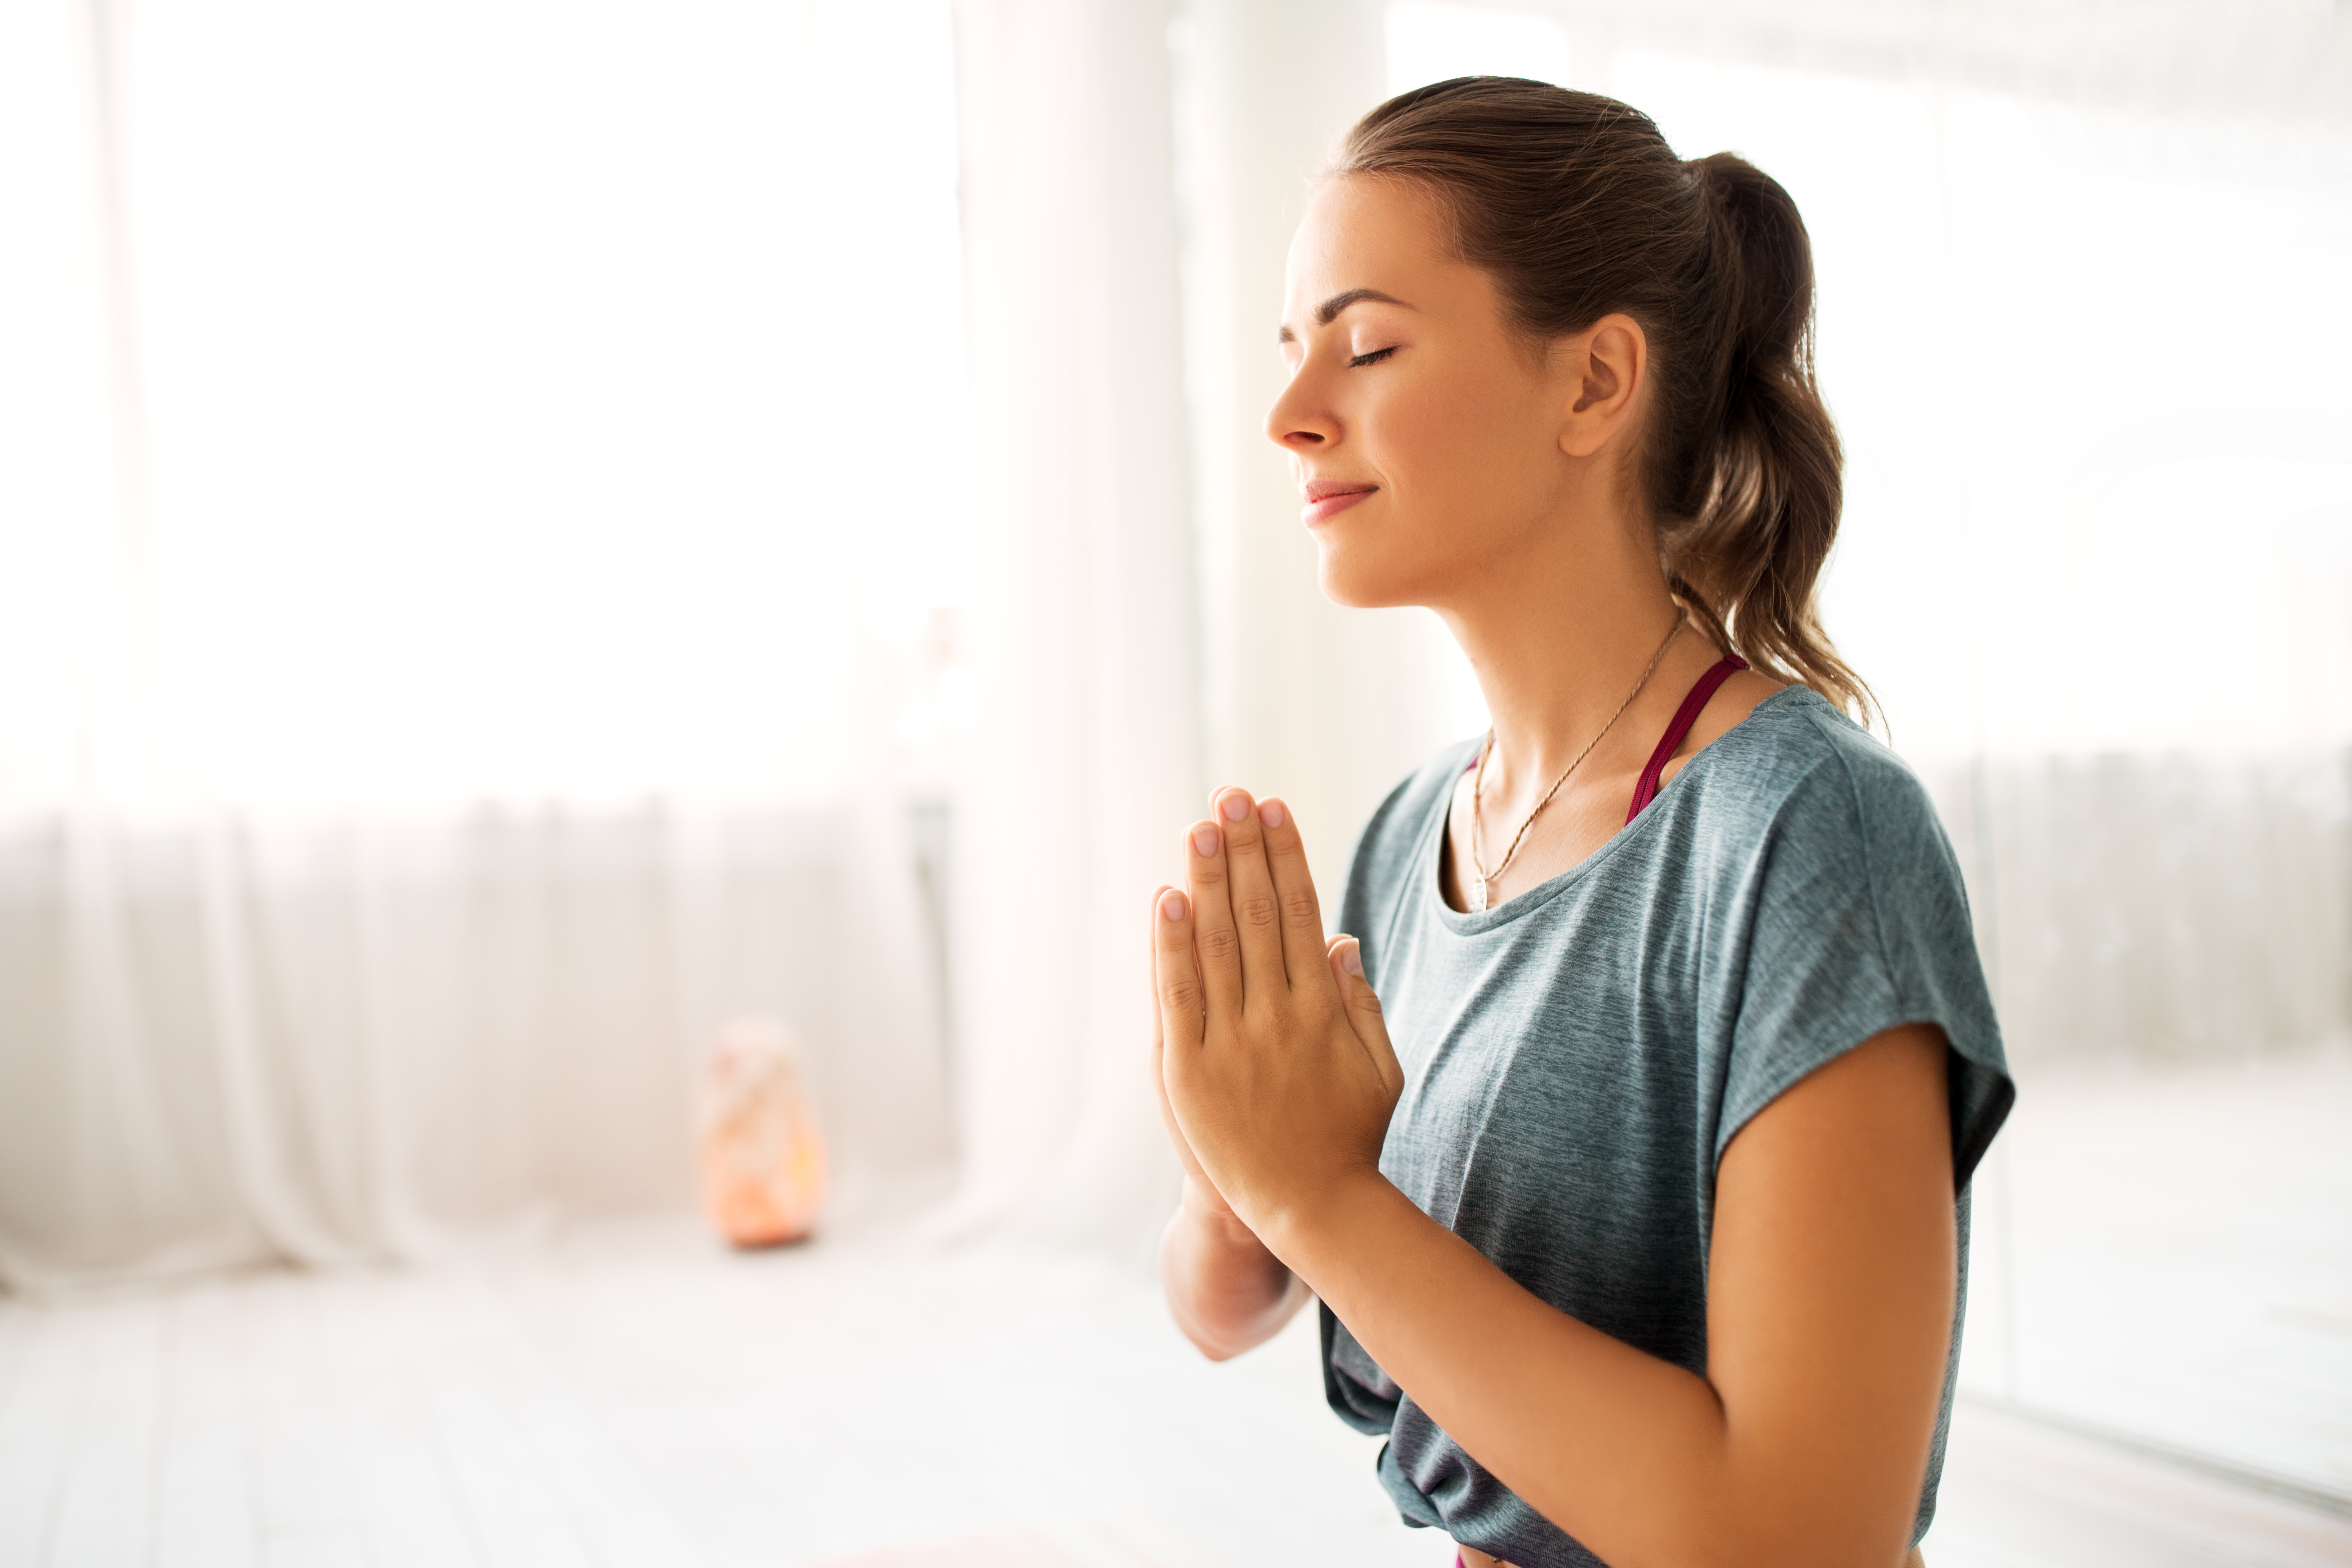 Woman meditating peacefully in a bright, sunlit room, insulated by vinyl windows.